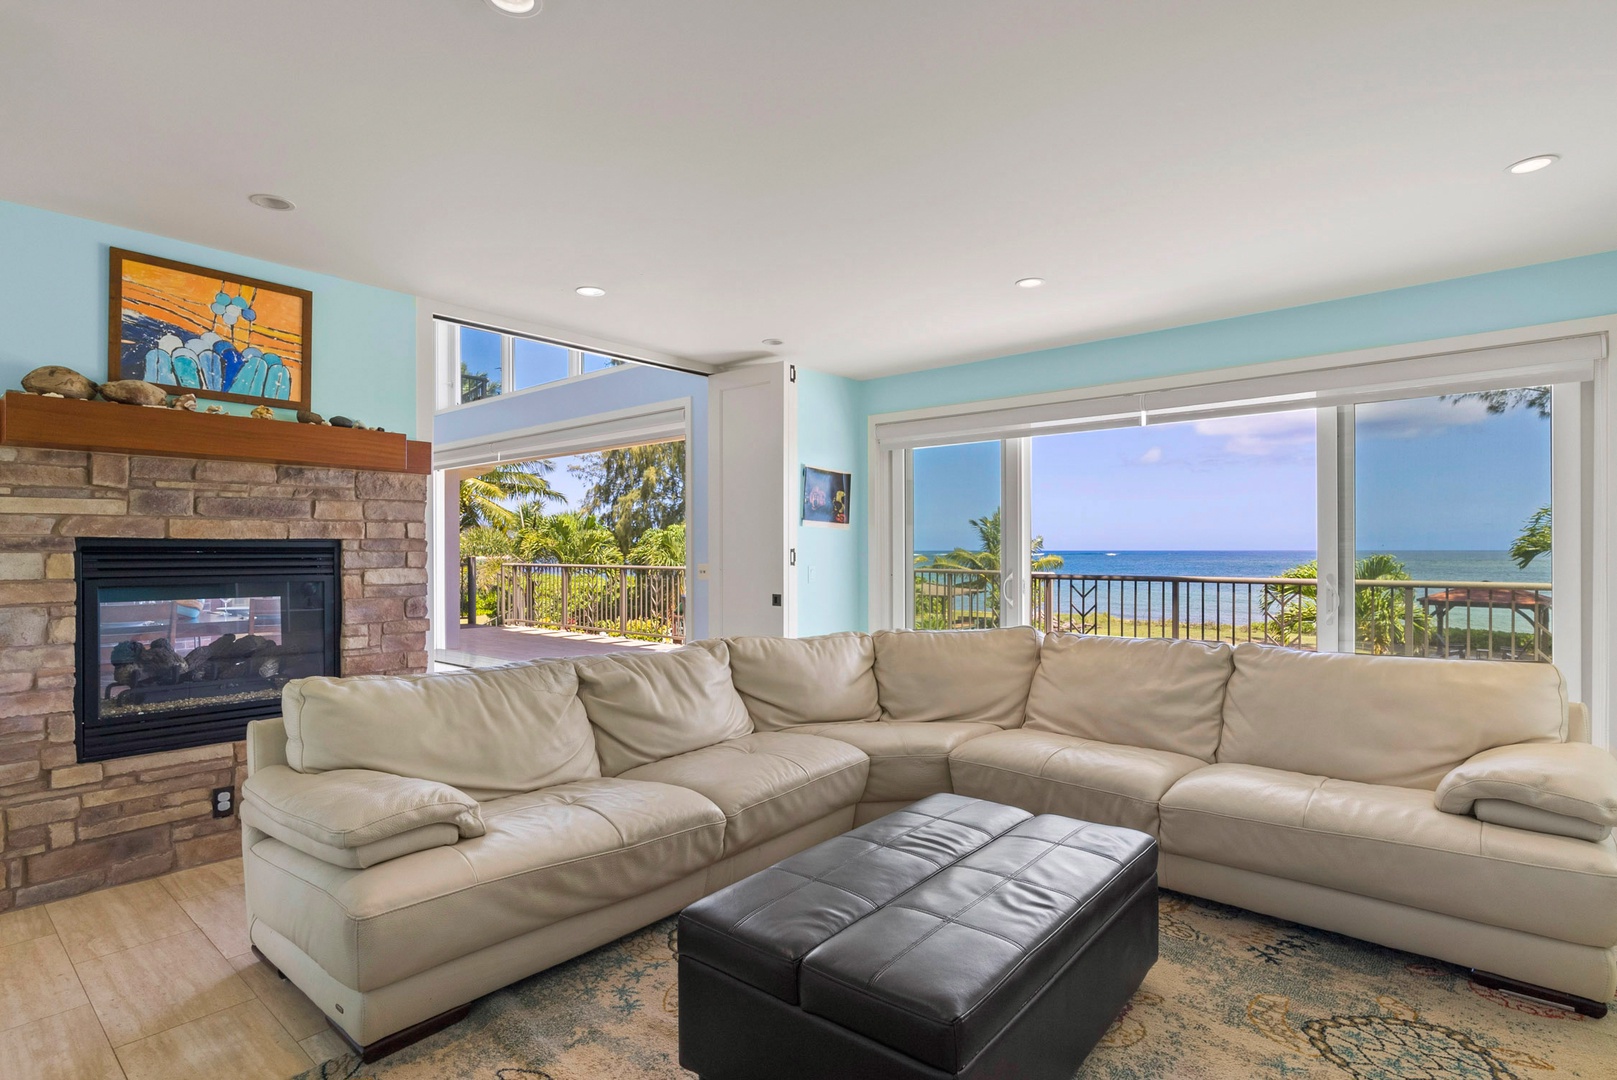 Waialua Vacation Rentals, Kala'iku Main - L-shaped couches with fireplace, a tv and Ocean views